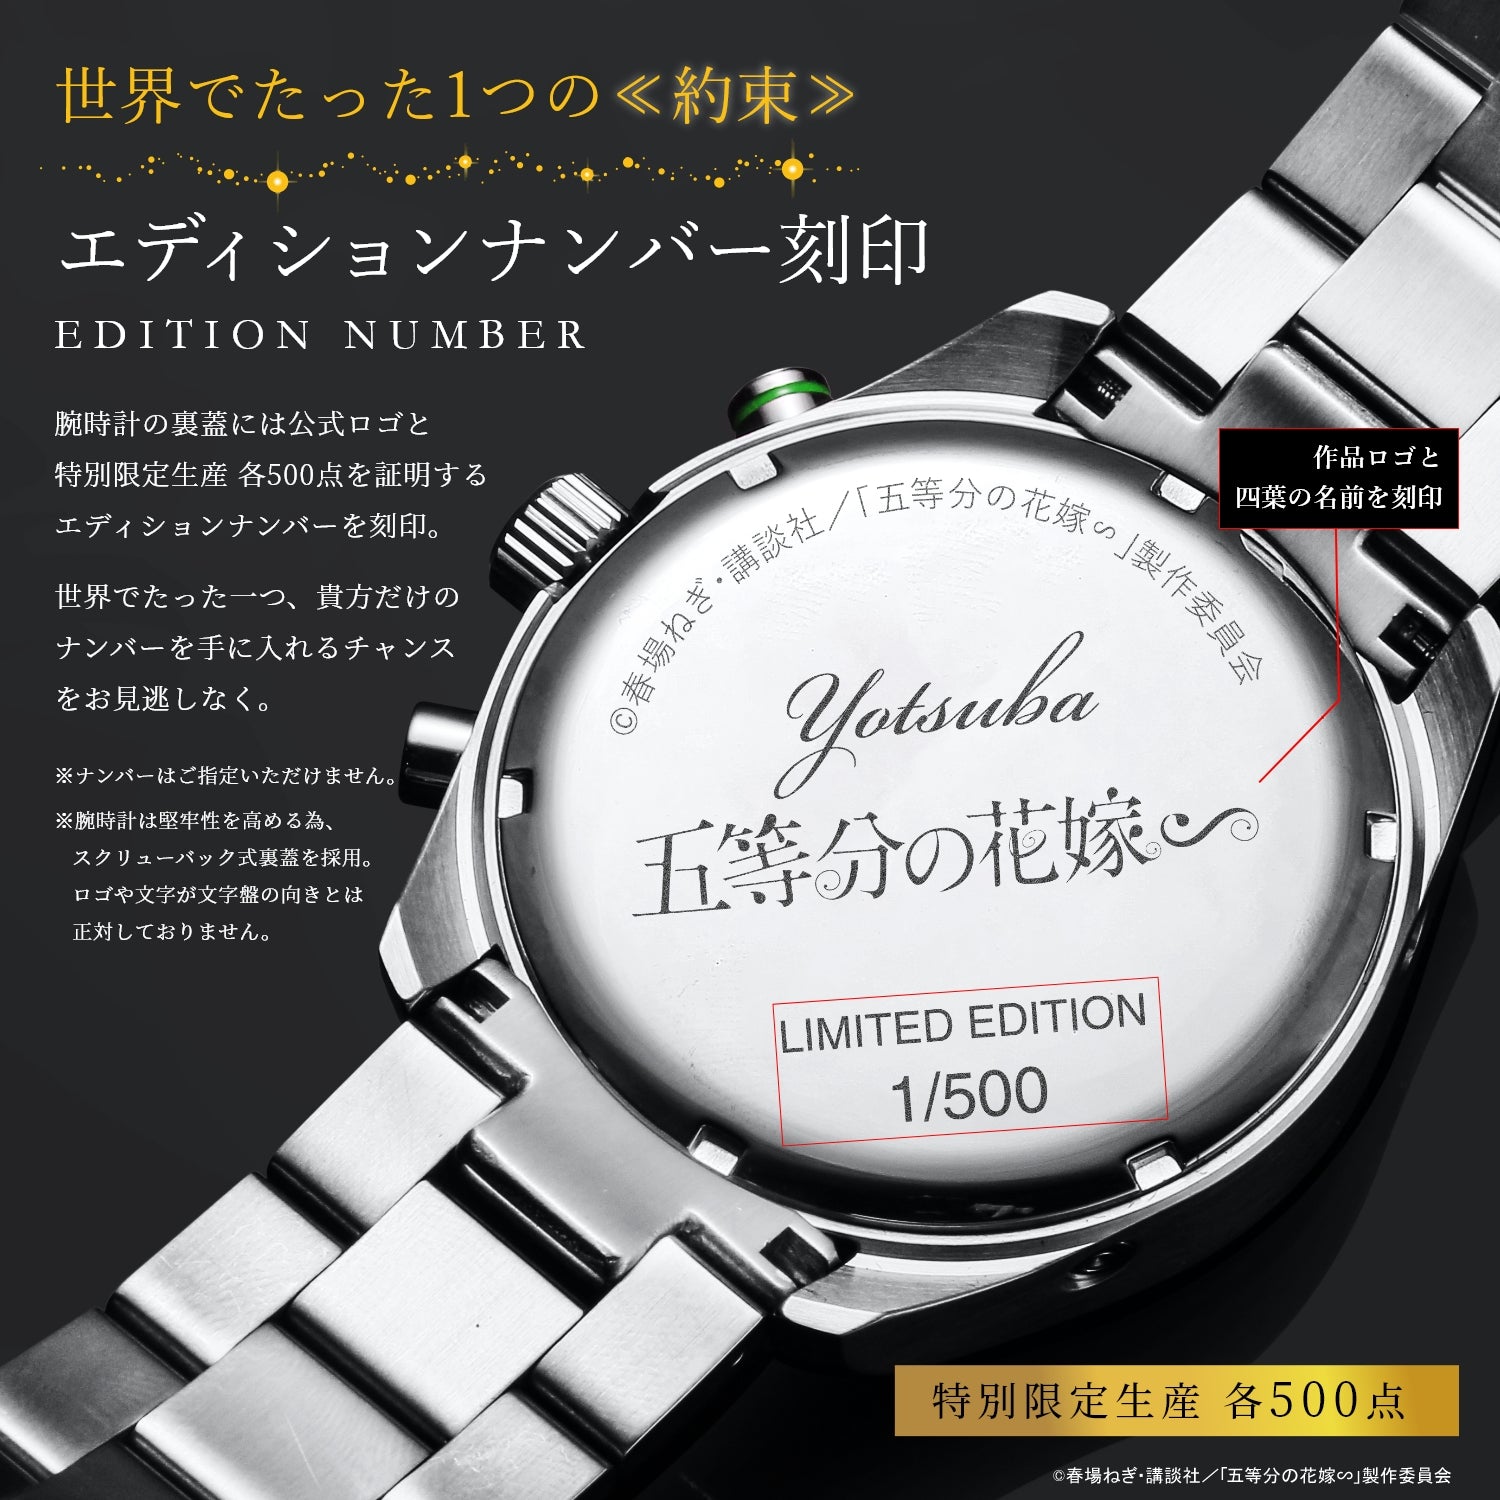 TV special anime“The Quintessential Quintuplets” Radio solar chronograph Winter special model change with belt| Yotsuba Nakano